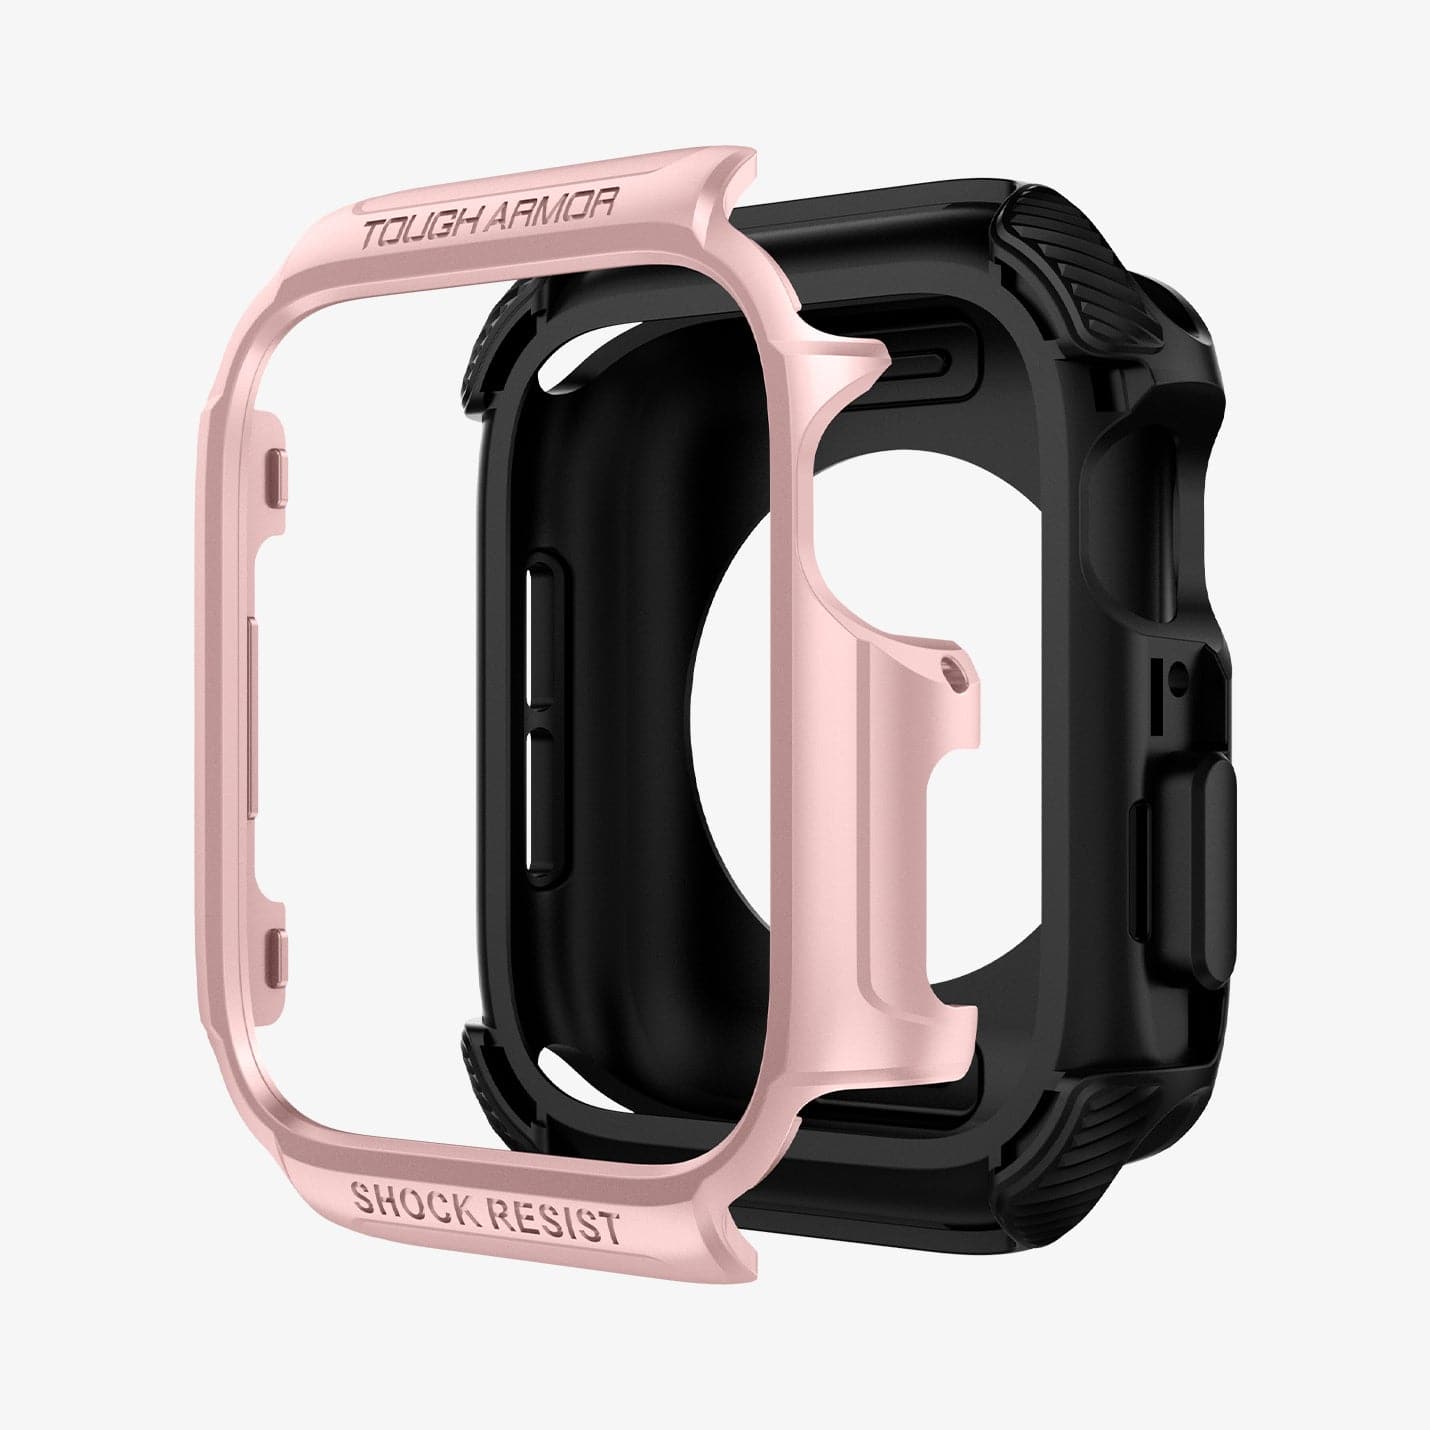 062CS24479 - Apple Watch Series (44mm) Case Tough Armor in rose gold showing the multiple layers of case